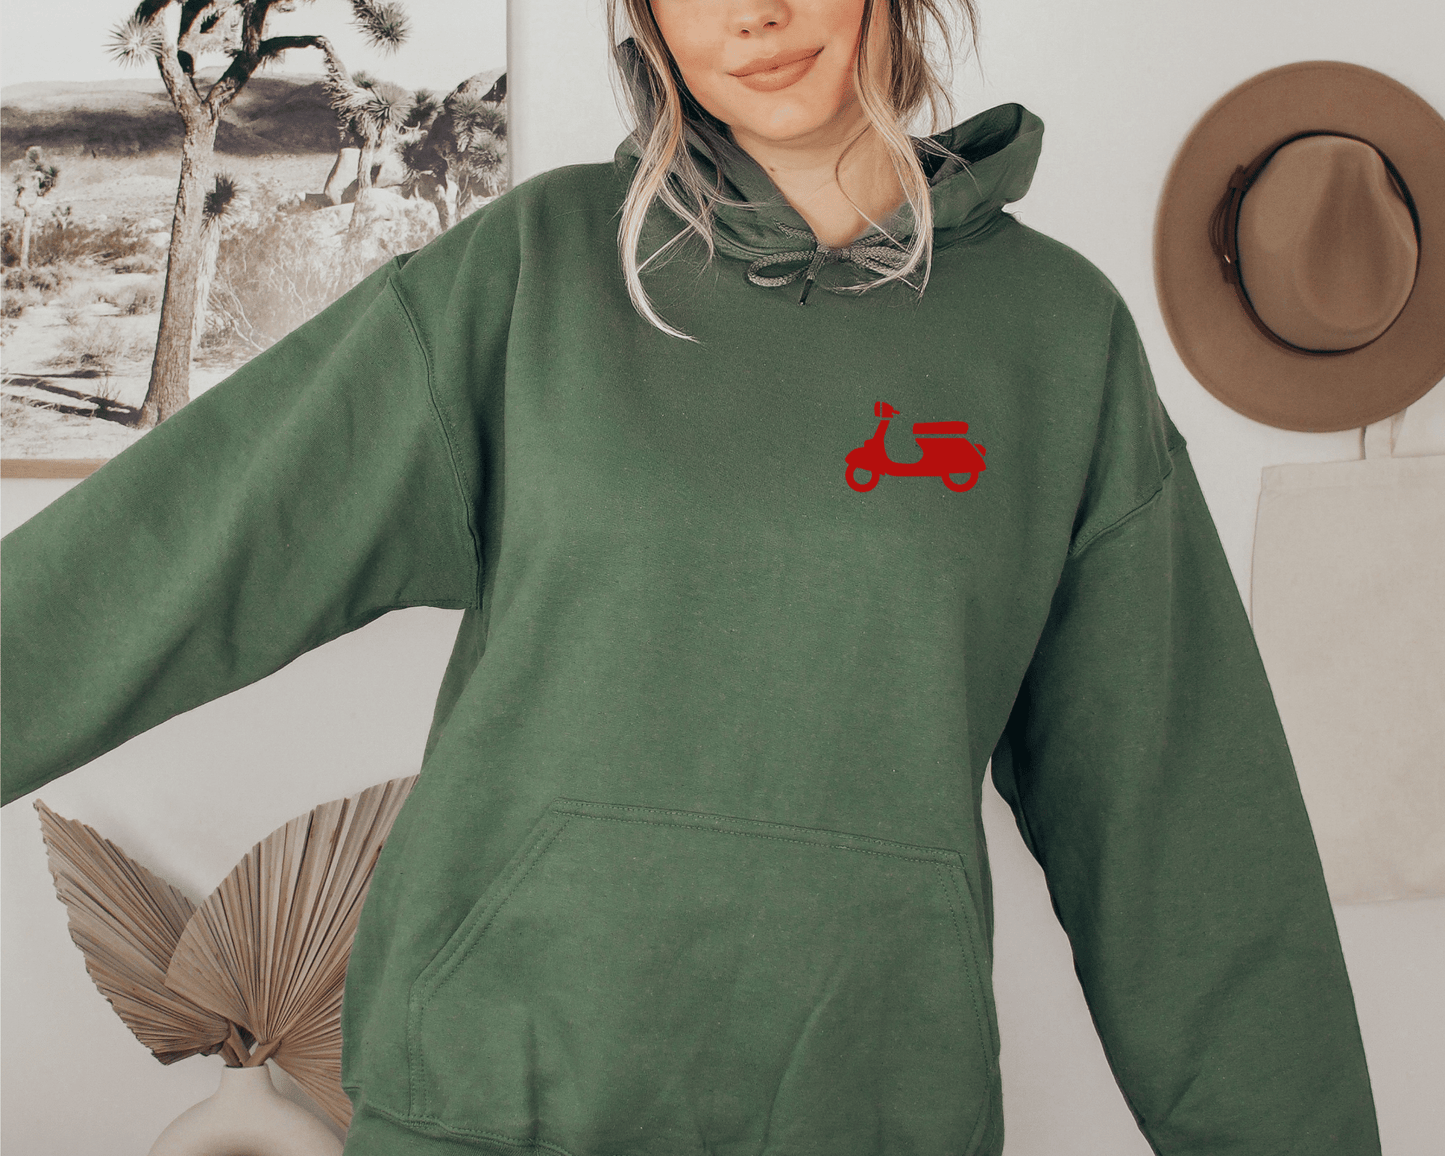 Ciao Scooter Hoodie in Military Green, front of hoodie.